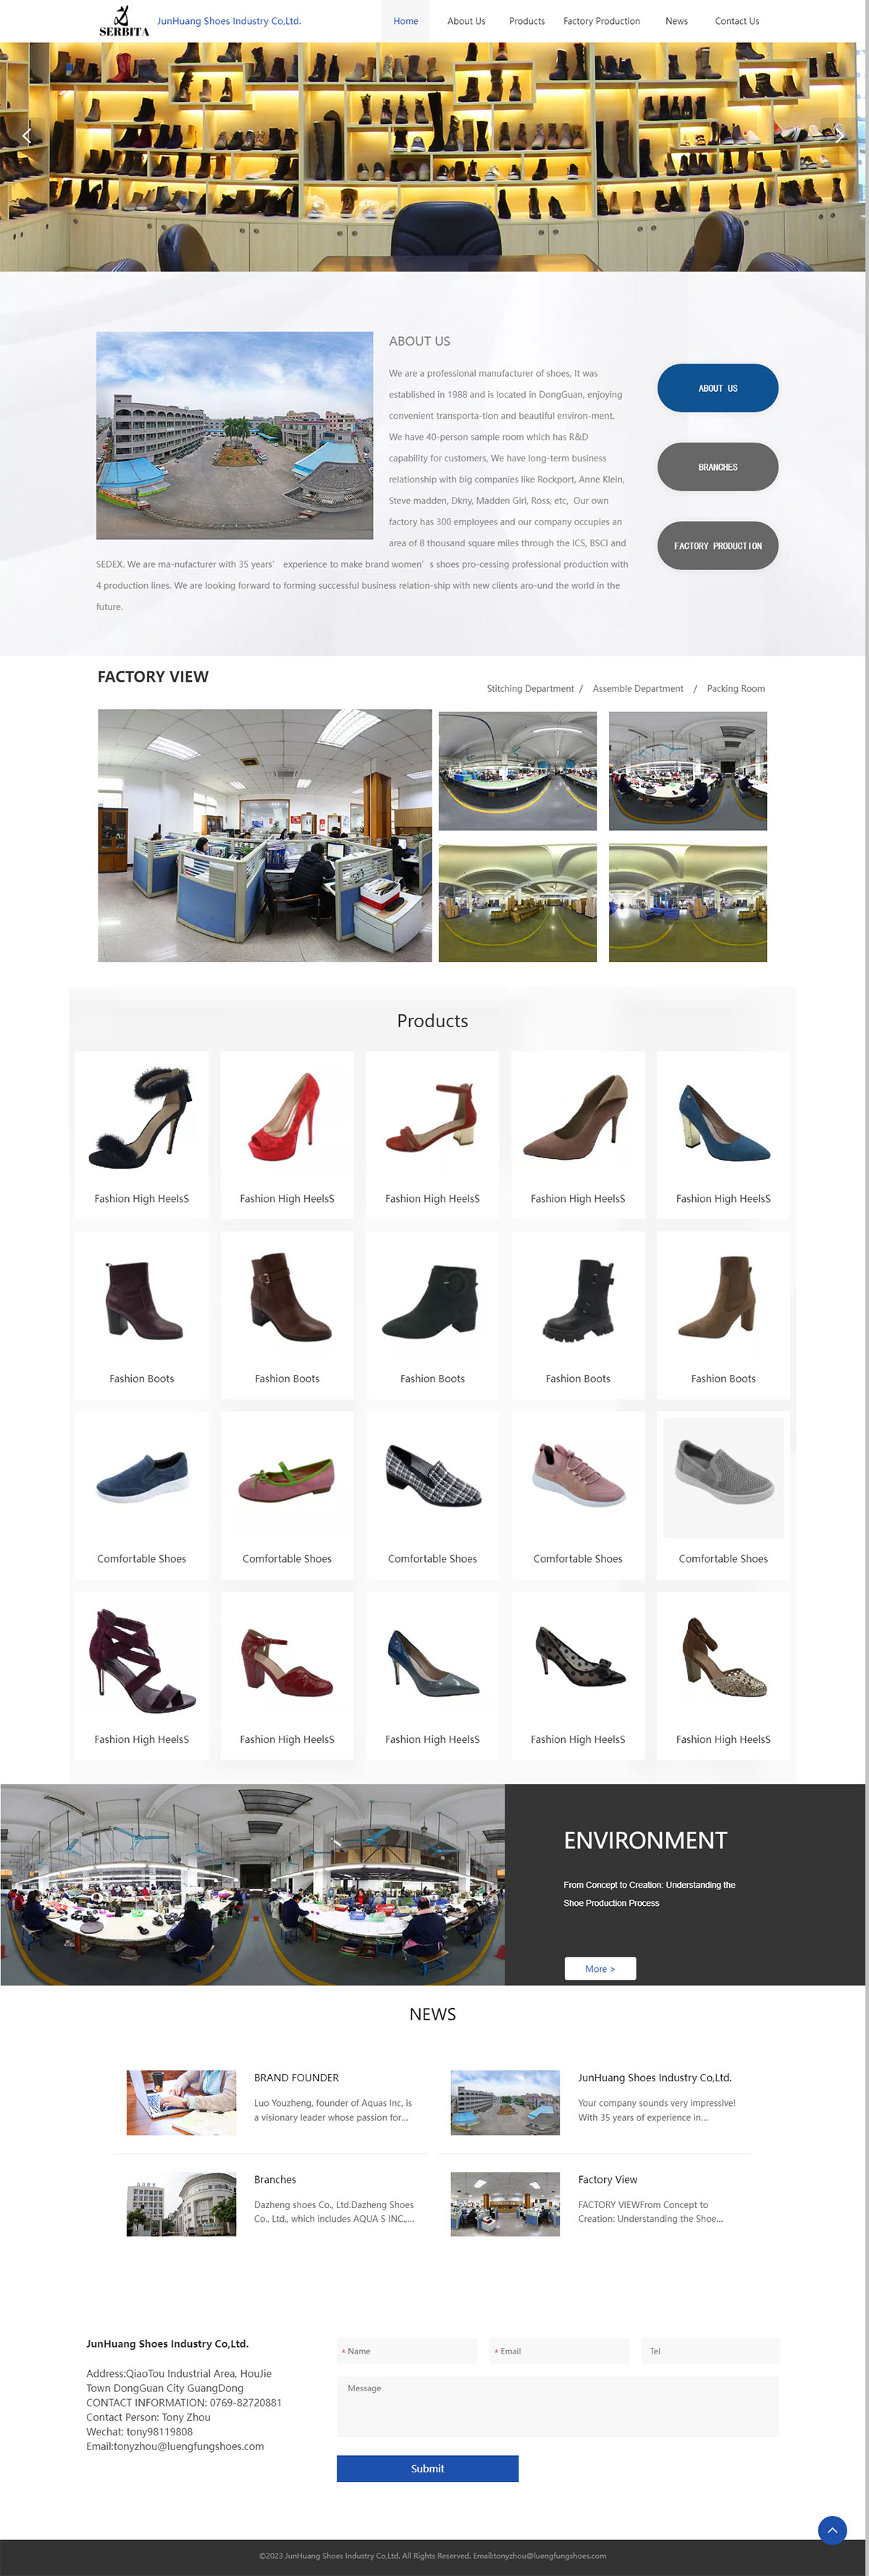 JunHuang Shoes Industry Co,Ltd.